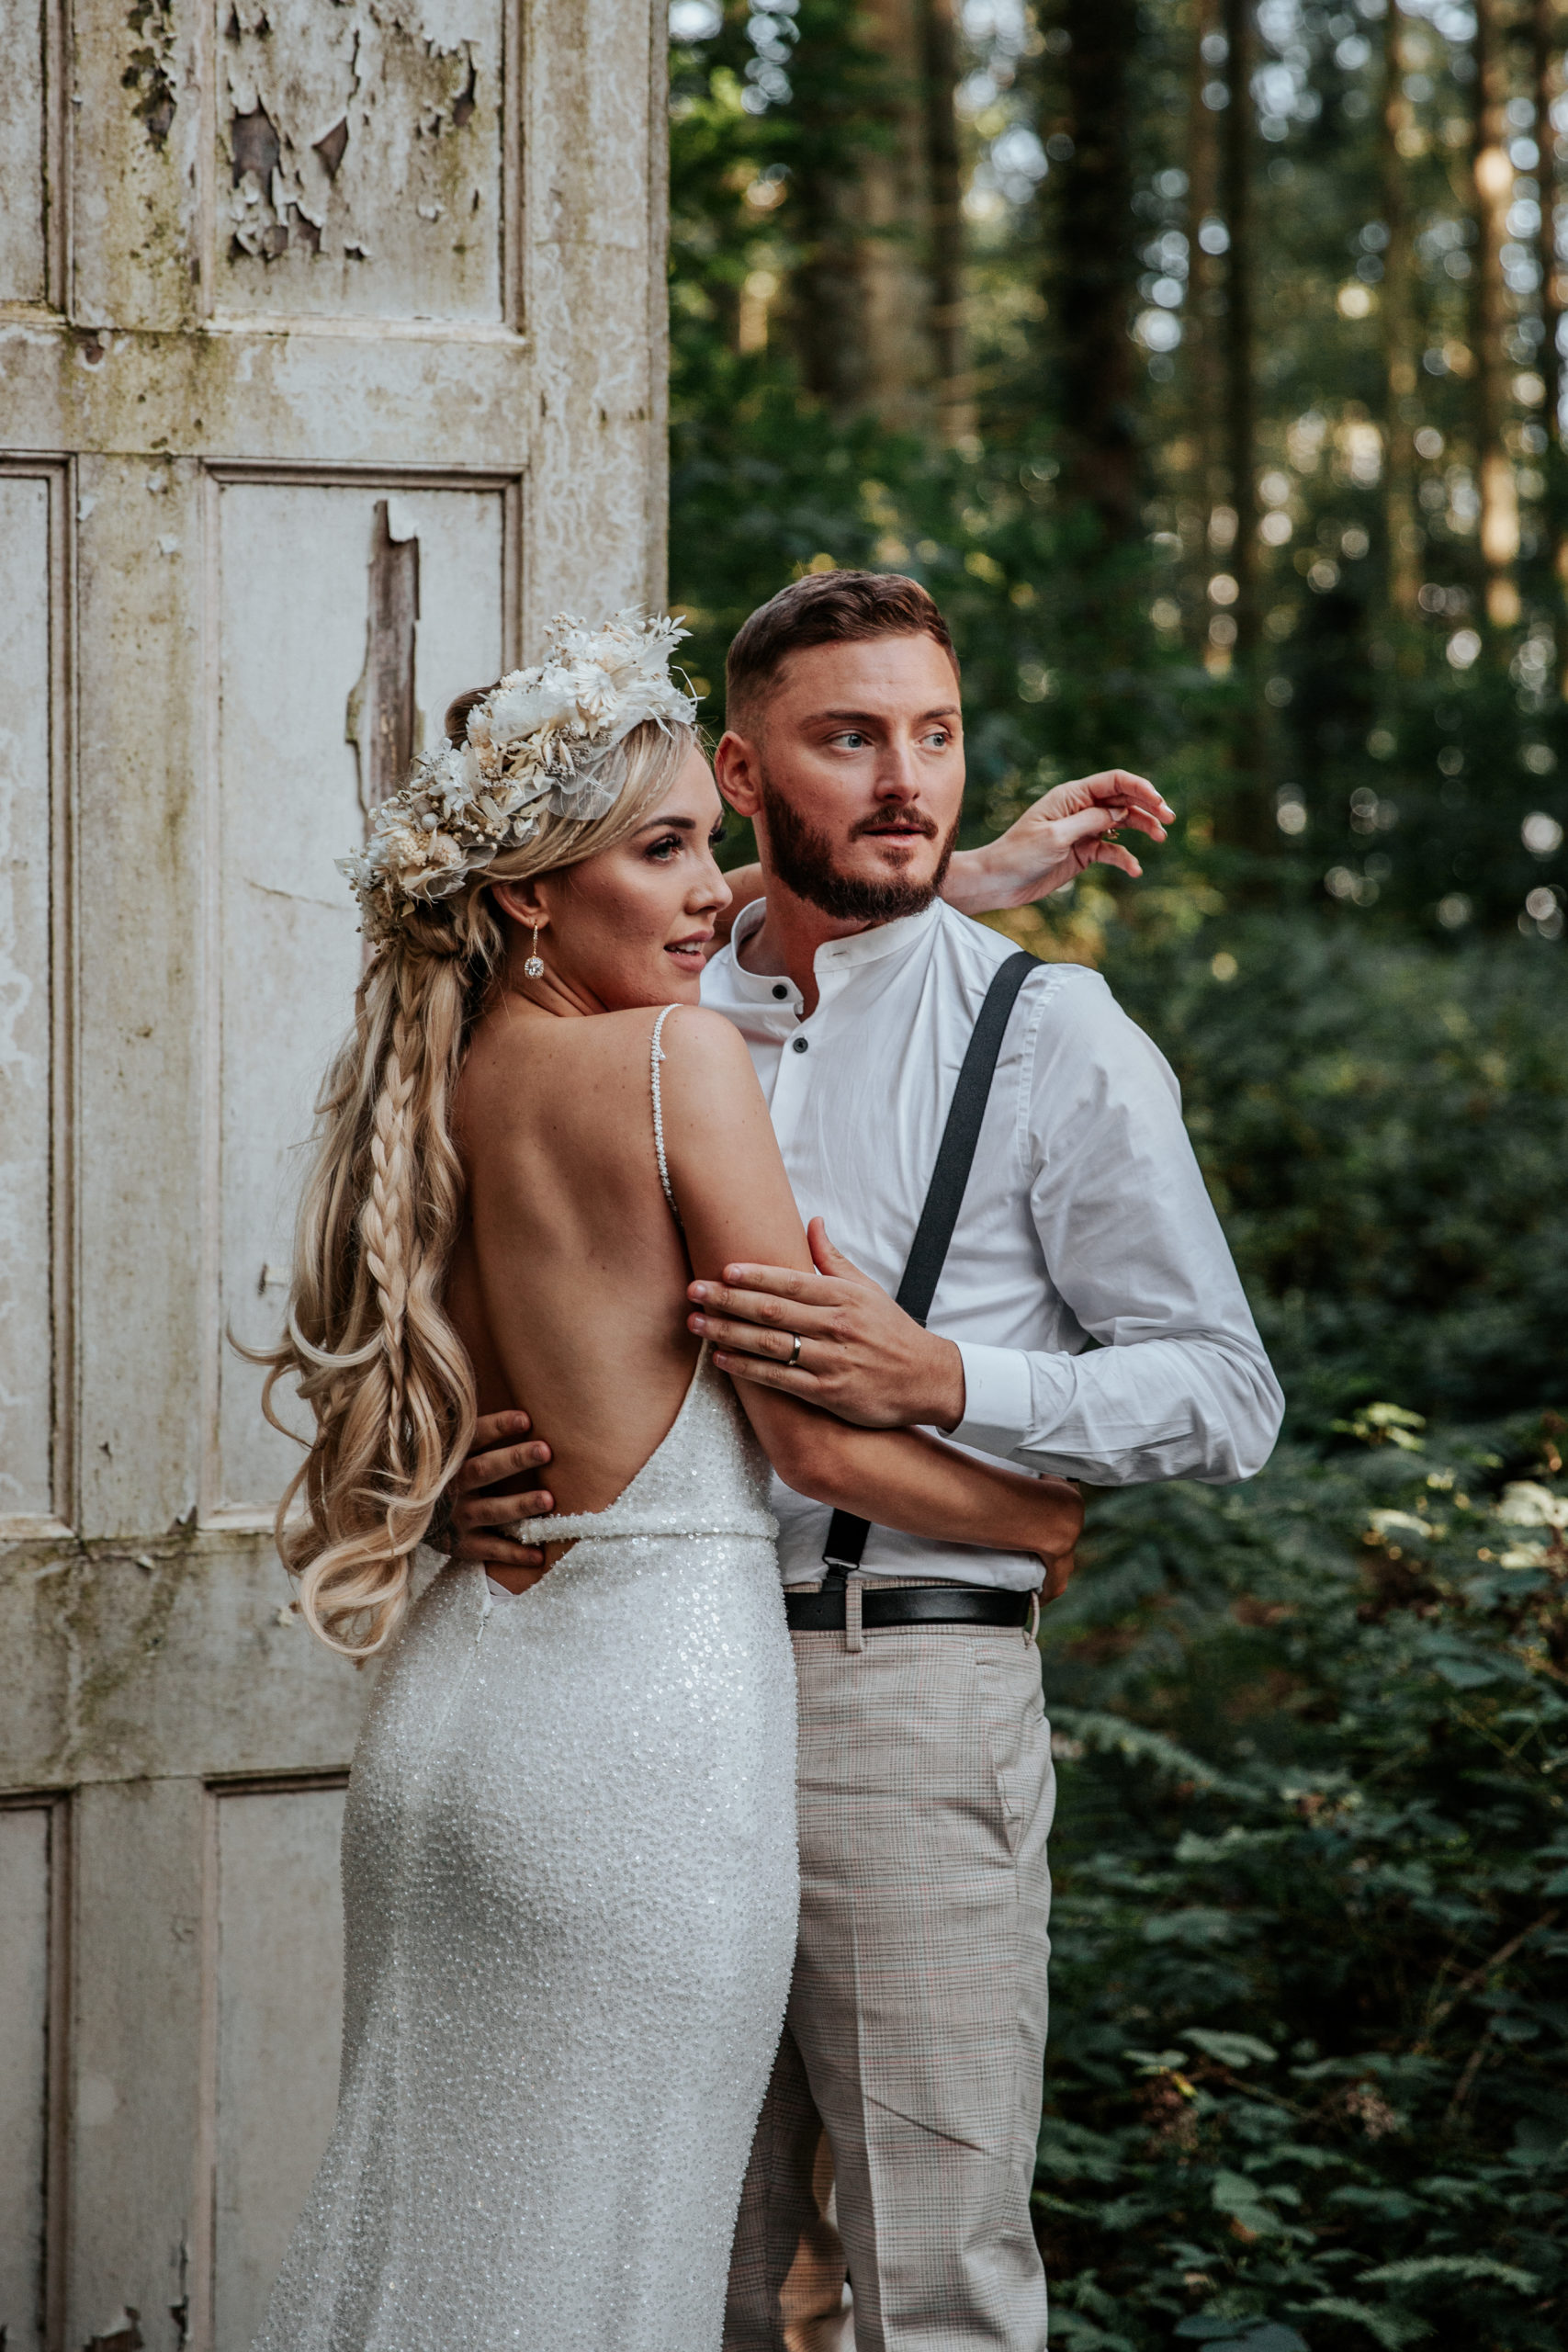 Will and Jess embrace at golden hour infront of Longton Wood's white doors